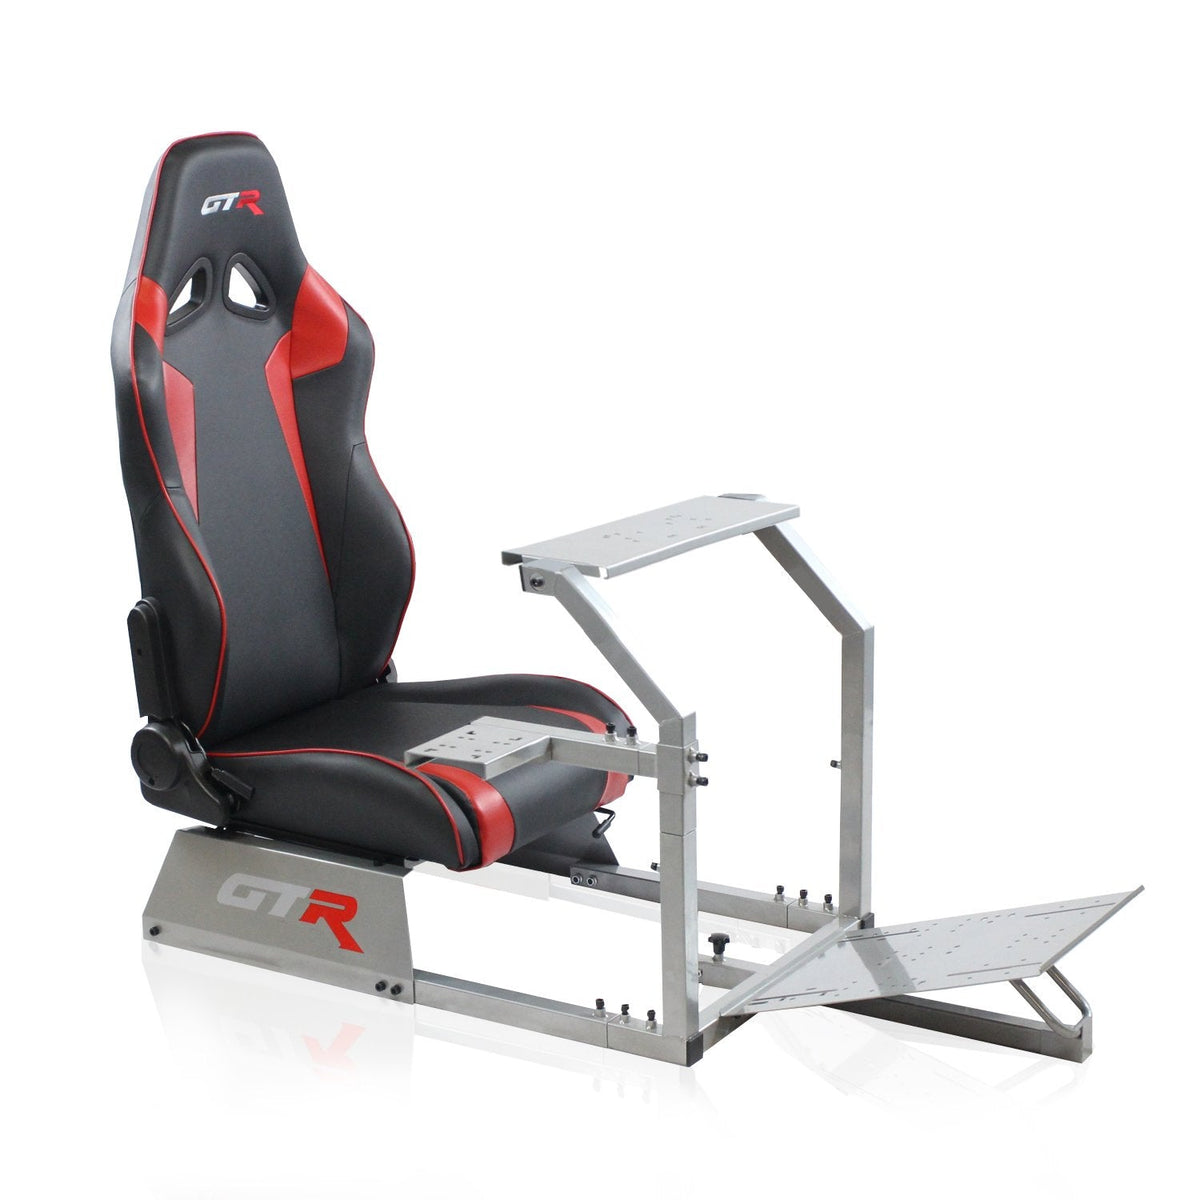 GTA Model Silver Frame with Black/Red Seat